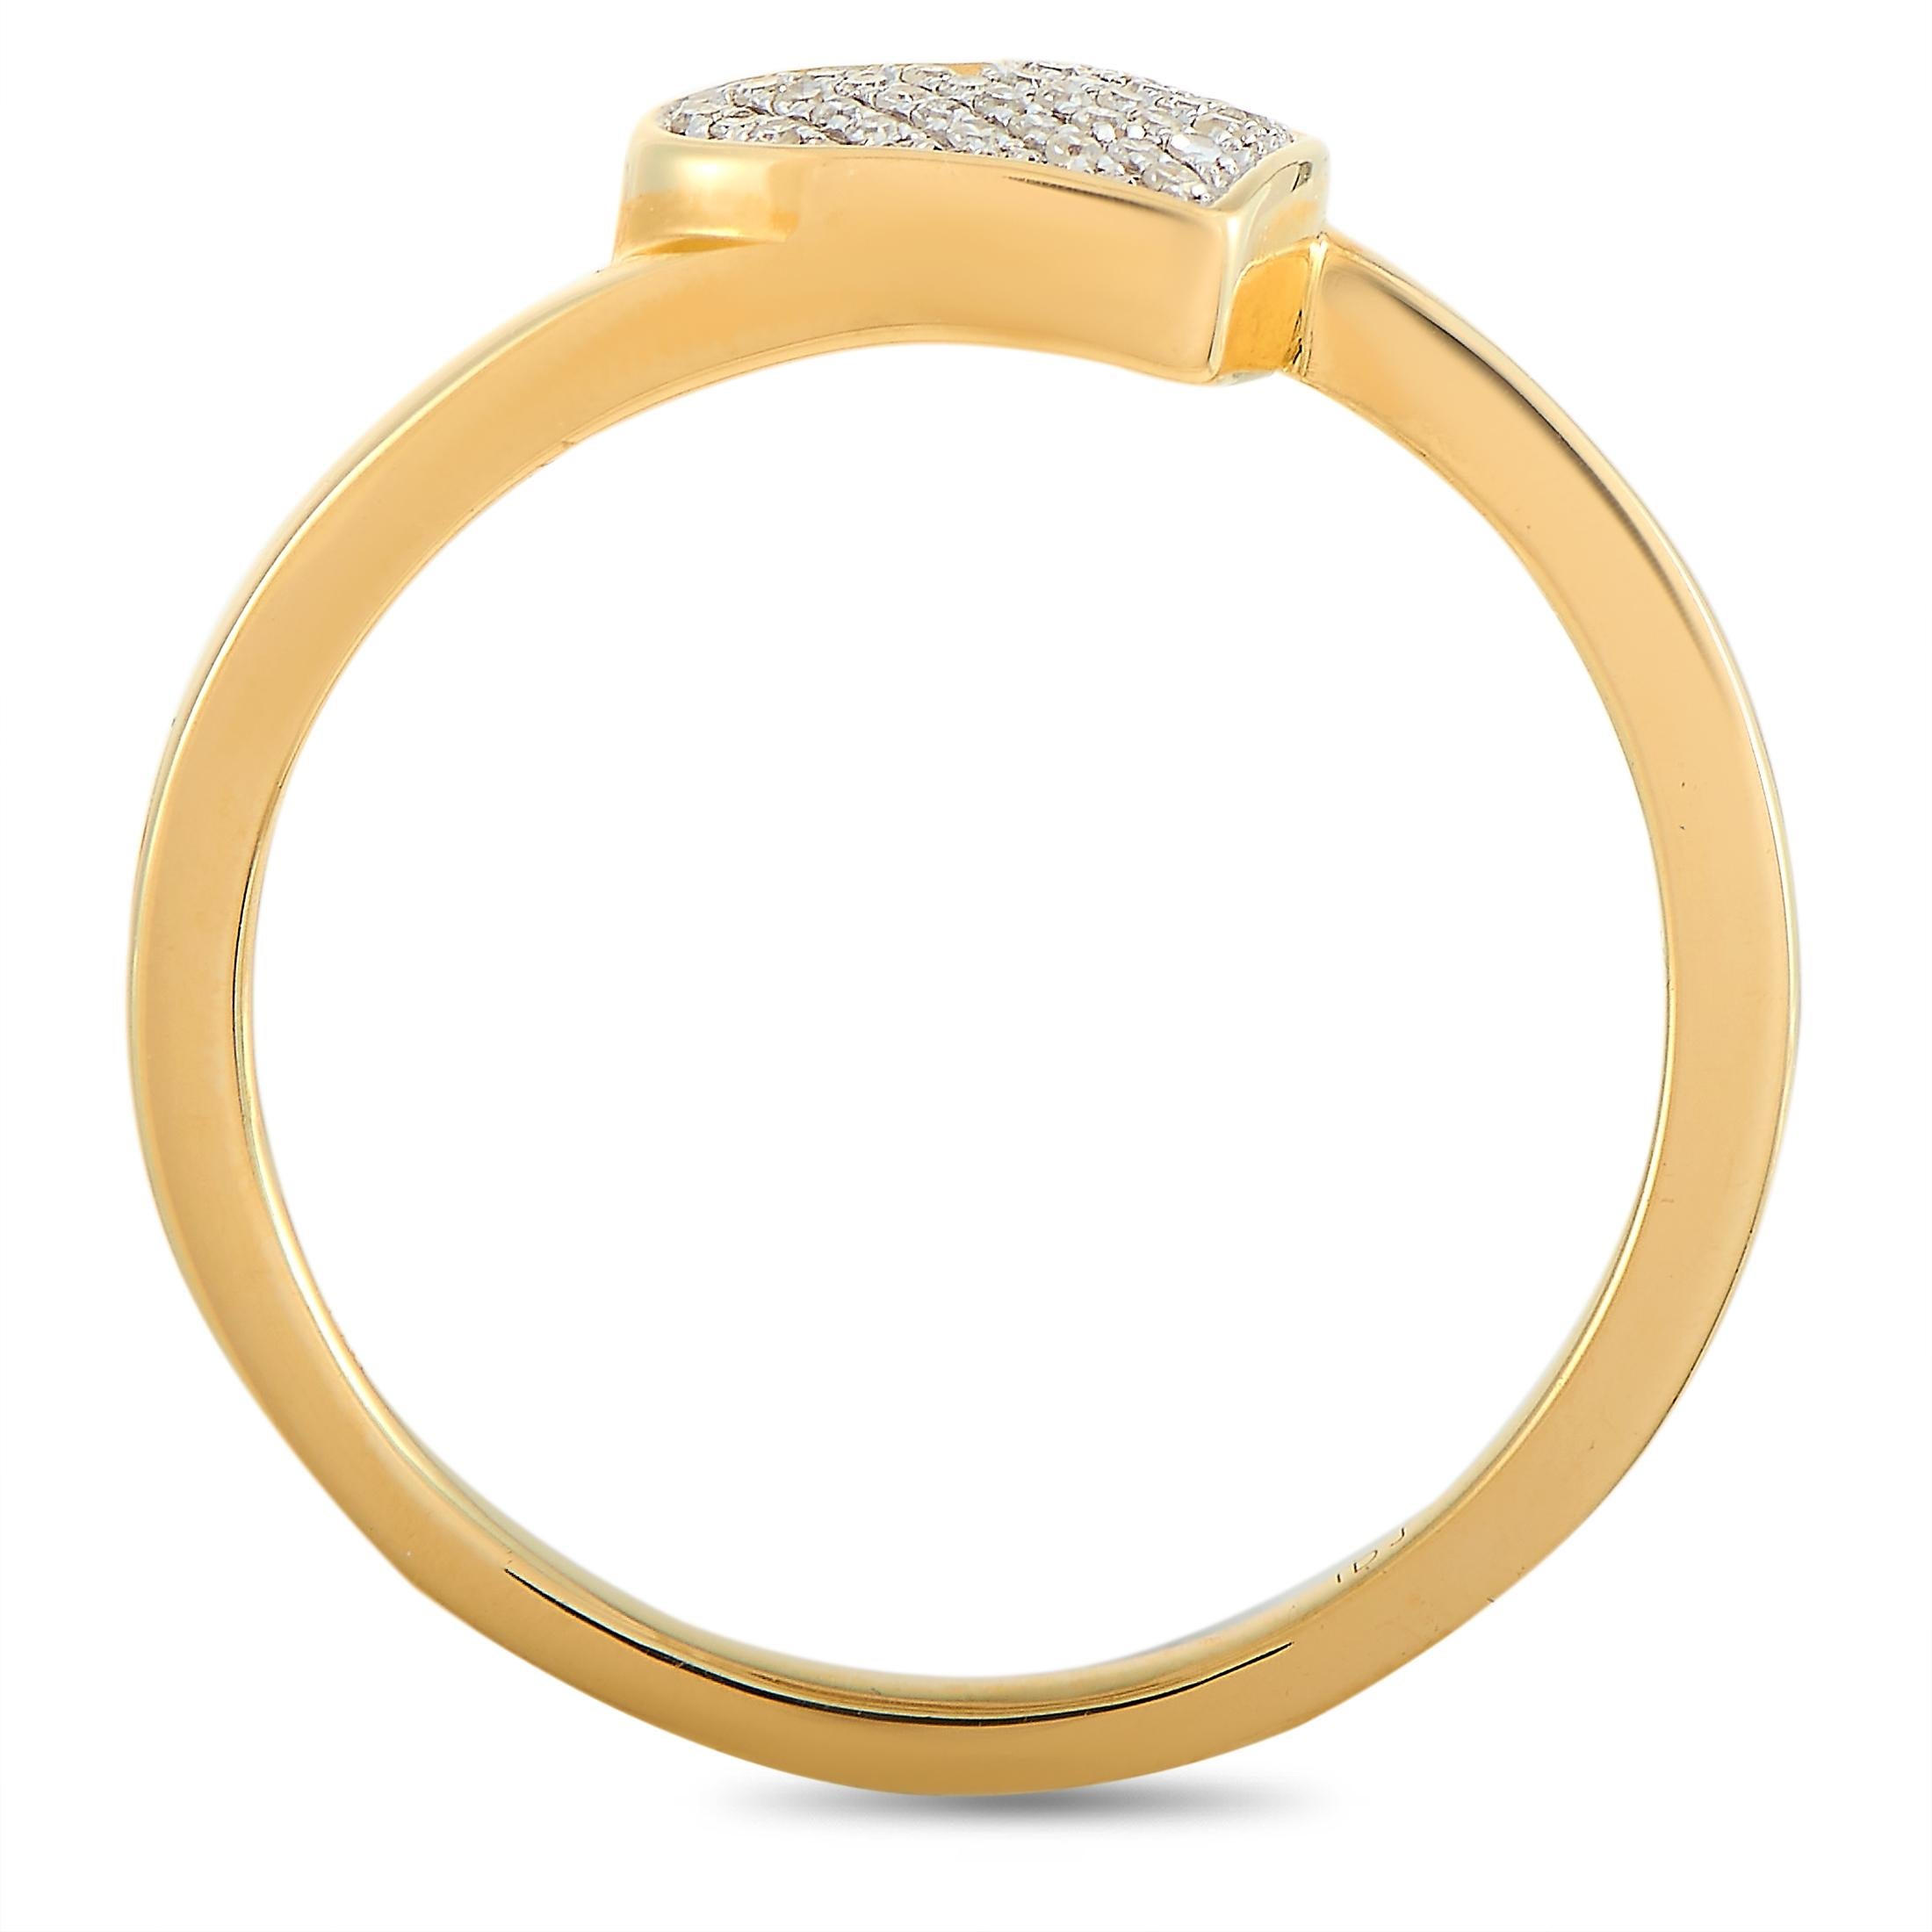 This LB Exclusive ring is made of 14K yellow gold and embellished with diamonds that amount to 0.09 carats. The ring weighs 2.4 grams and boasts band thickness of 2 mm and top height of 3 mm, while top dimensions measure 6 by 10 mm.
 
 Offered in